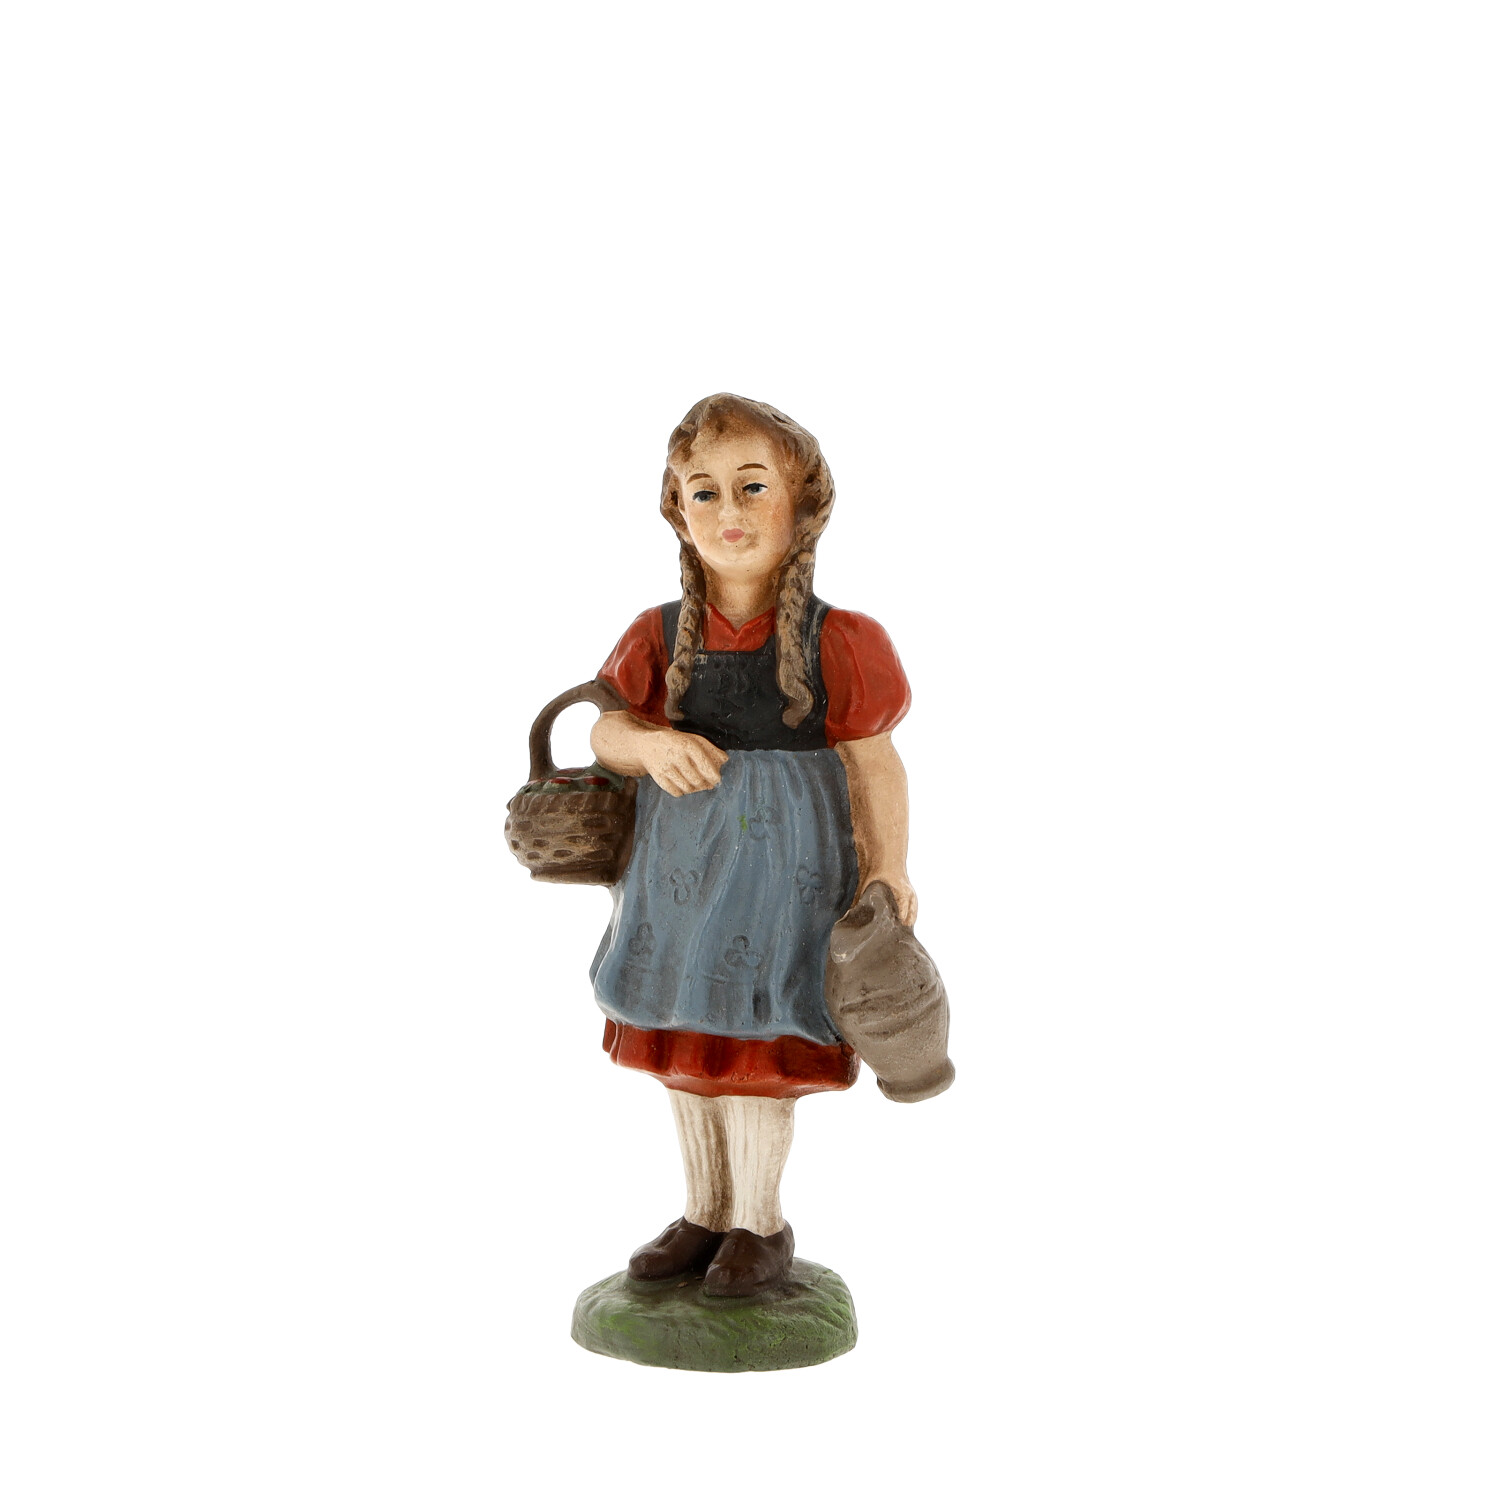 Girls with basket and jug - Marolin Nativity figure - made in Germany